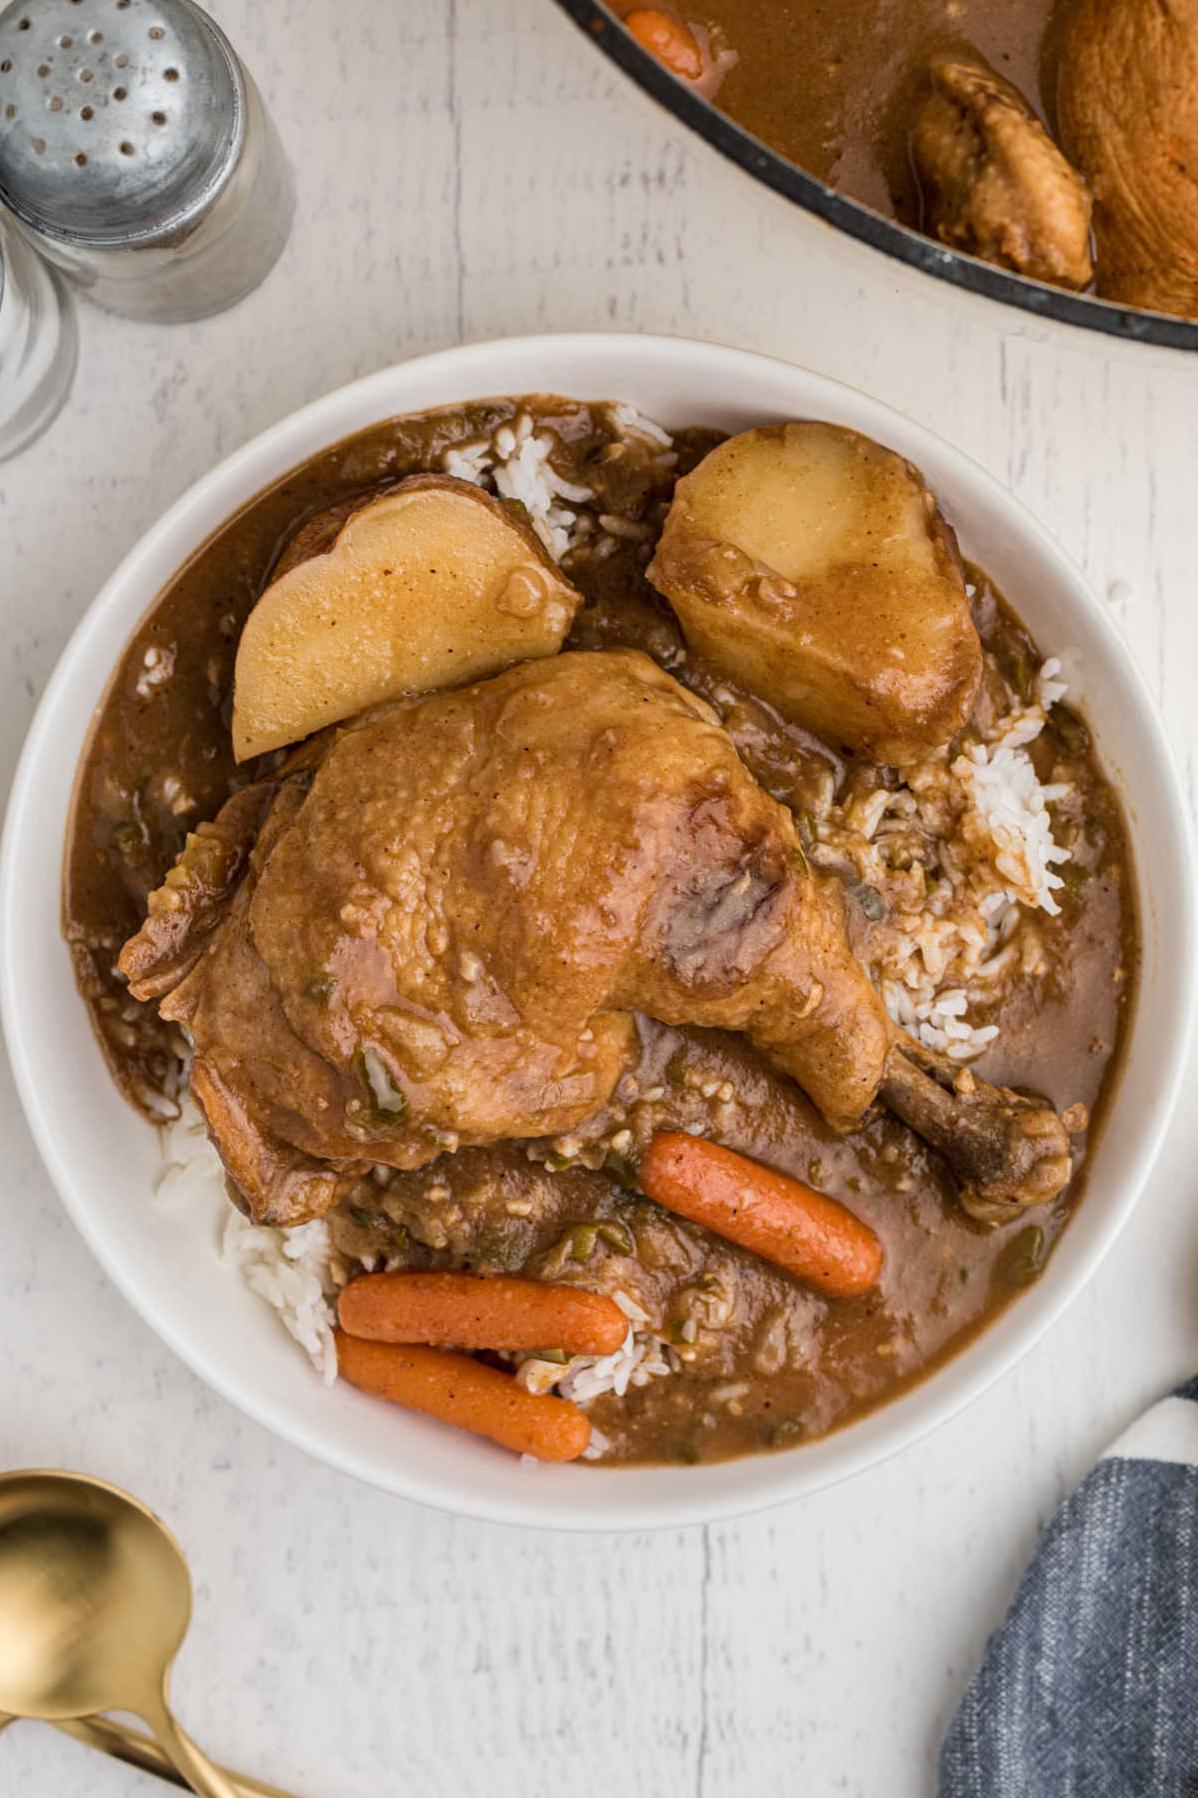  This stew is the ultimate comfort food on a cold winter day.